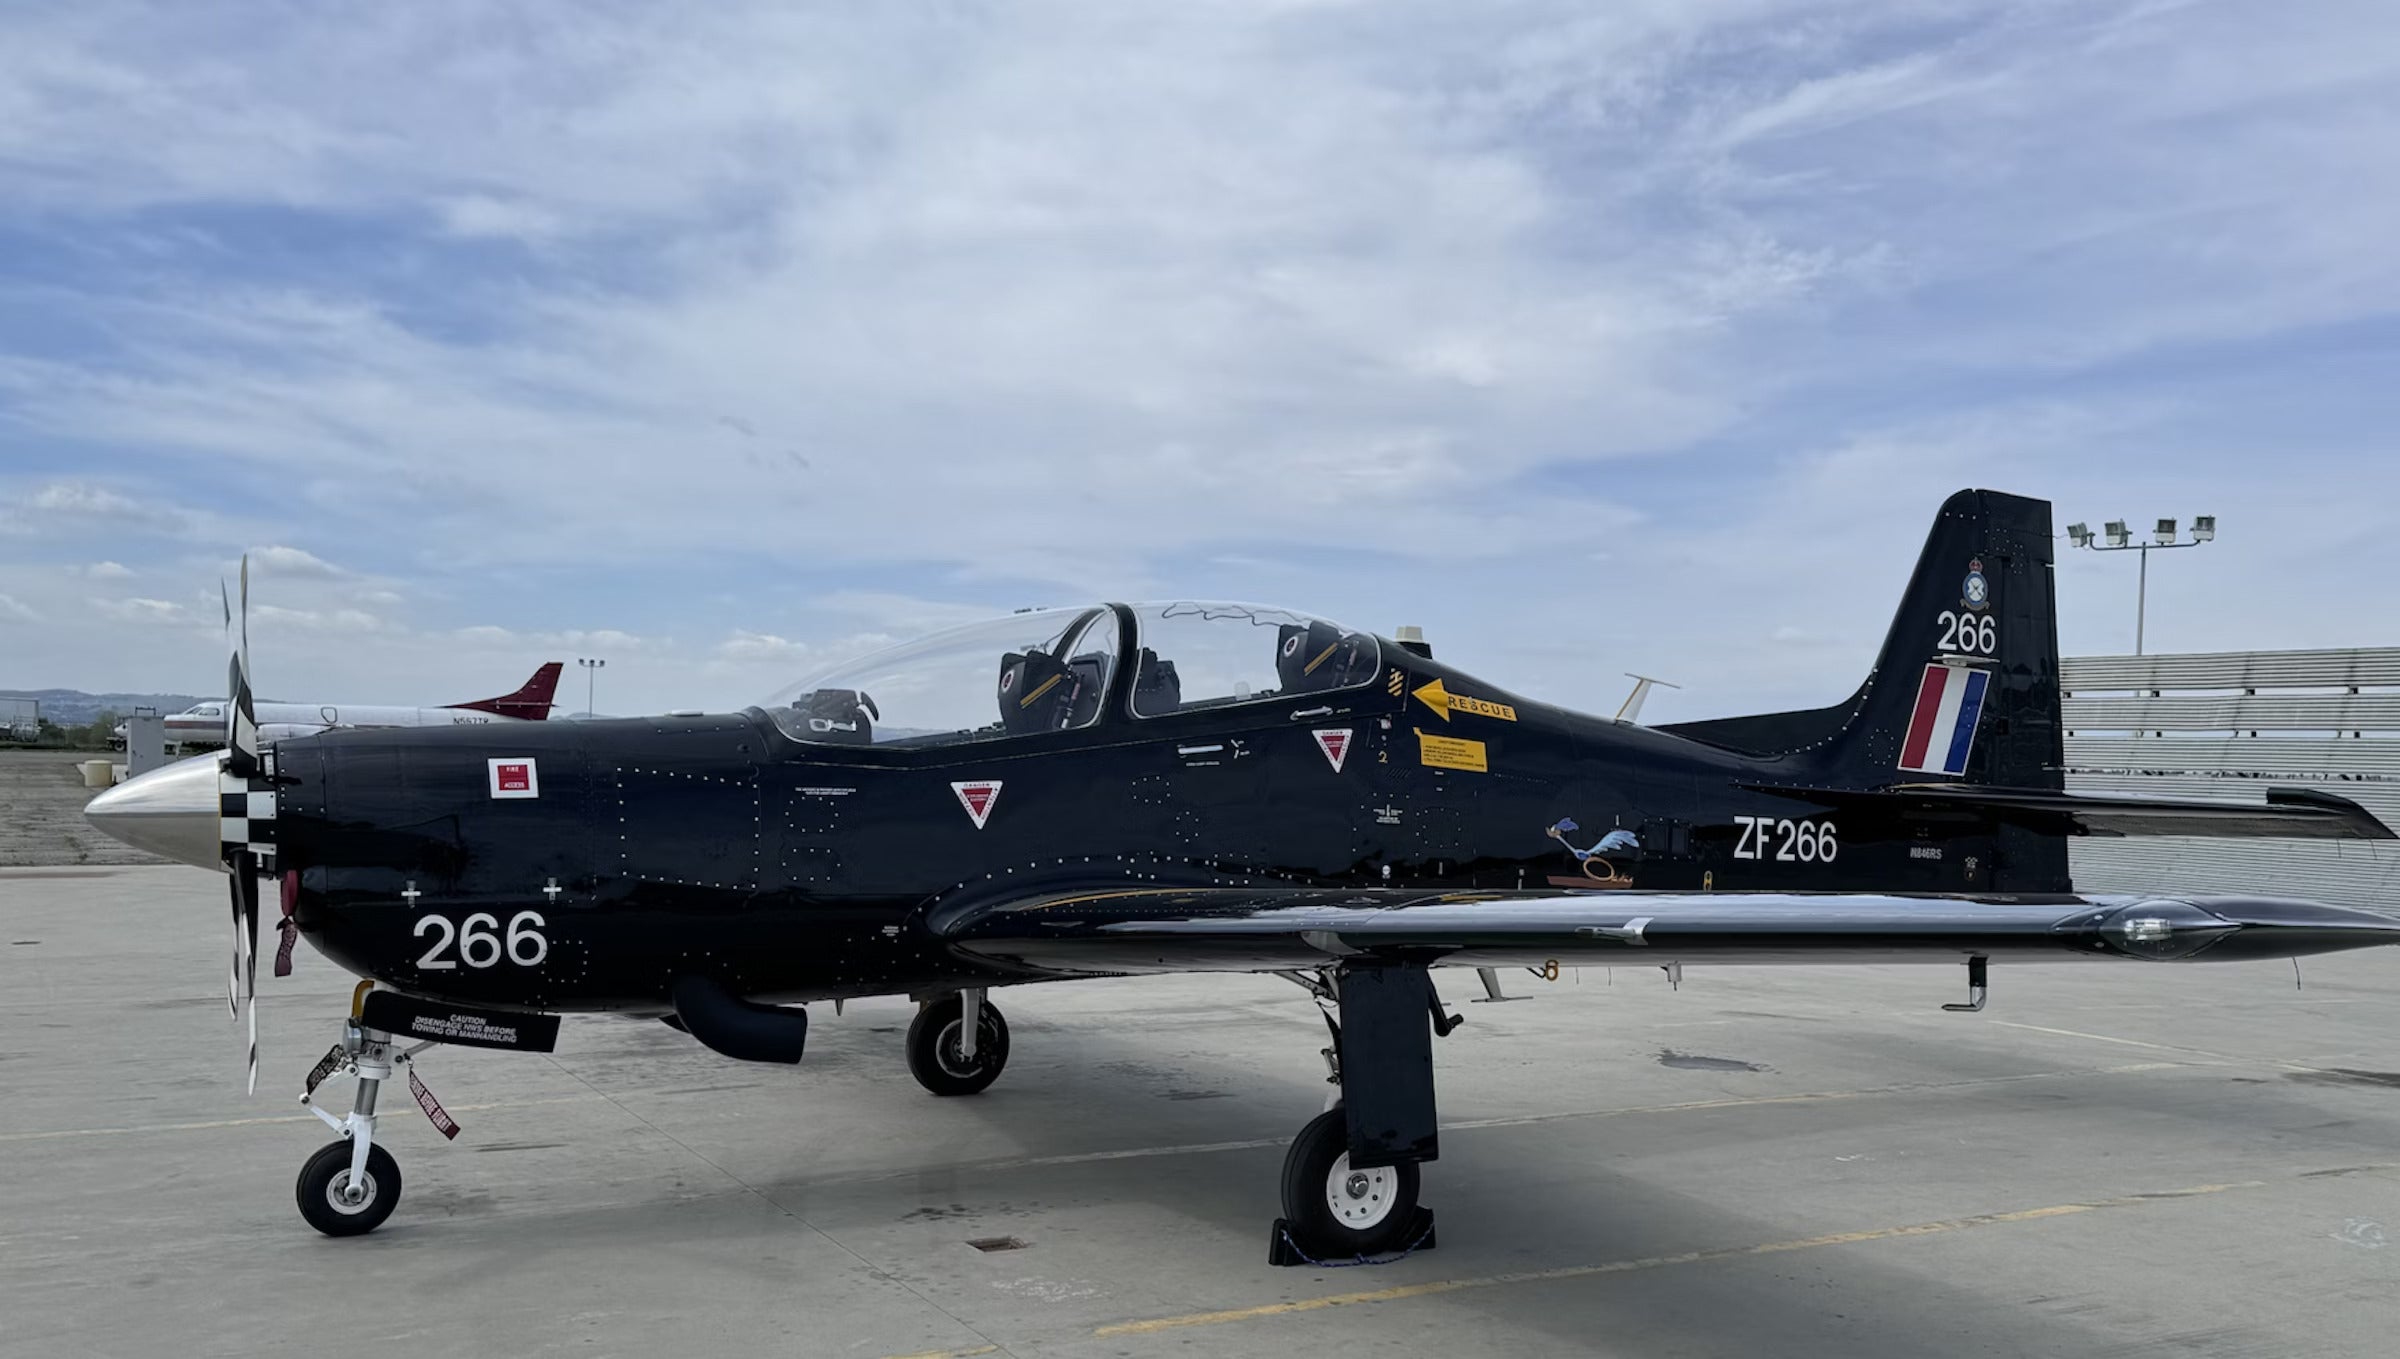 This 1990 Embraer Tucano Is a Military-Spec ‘AircraftForSale’ Top Pick